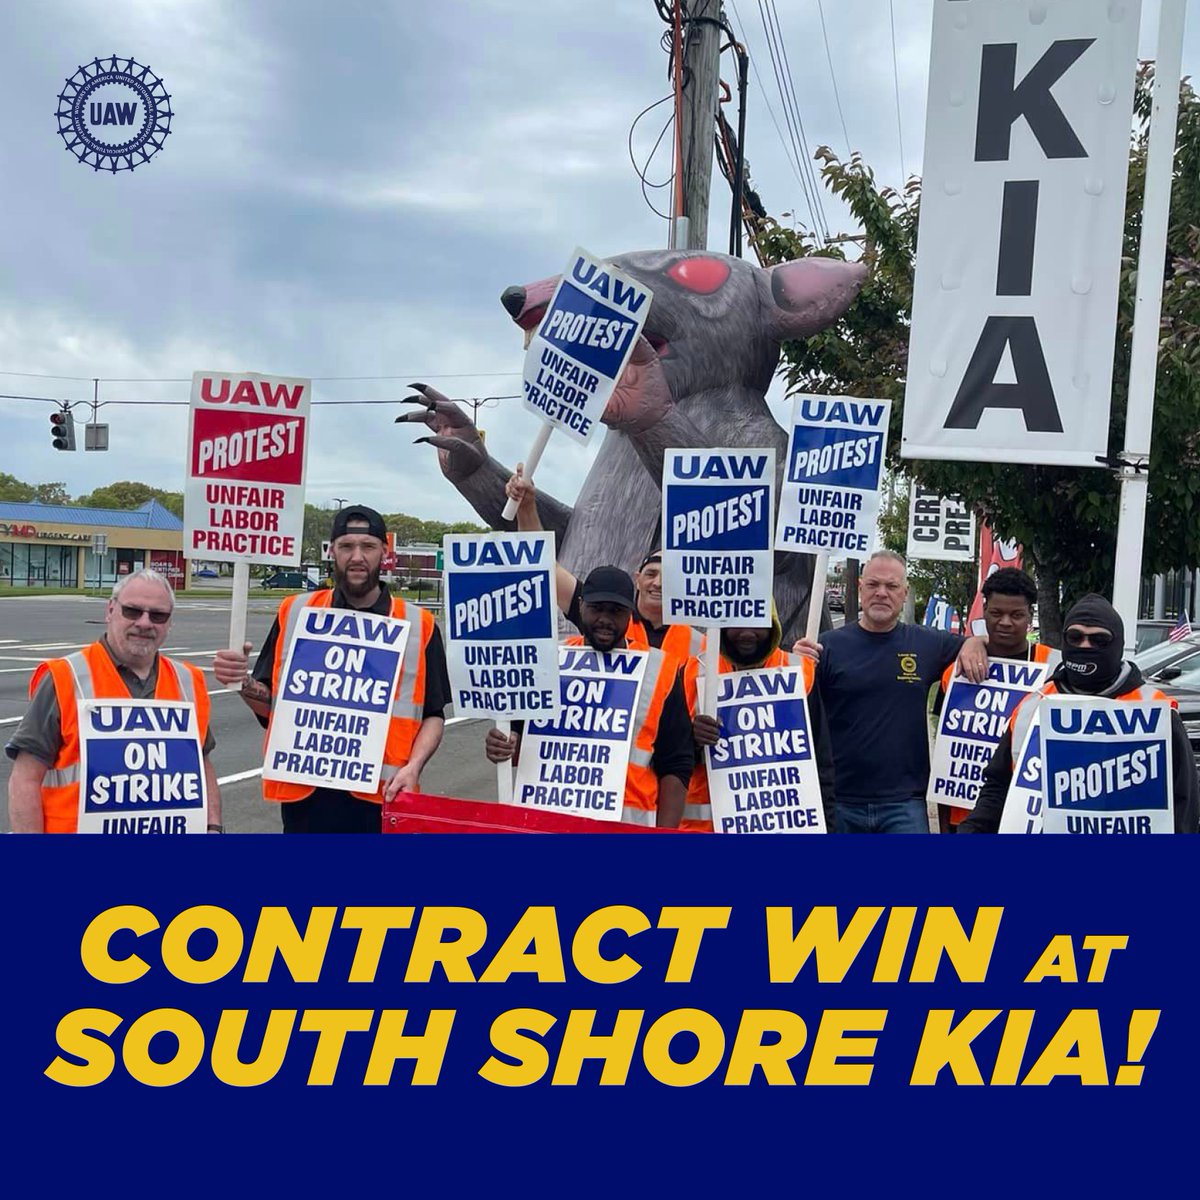 After bravely manning the picket line for seven days, UAW Local 259 members in @UAWRegion9A who work at South Shore Kia in Copiague, NY, have won an amazing contract! Management tried every trick in the book to break their union, but it only made workers' resolve stronger.